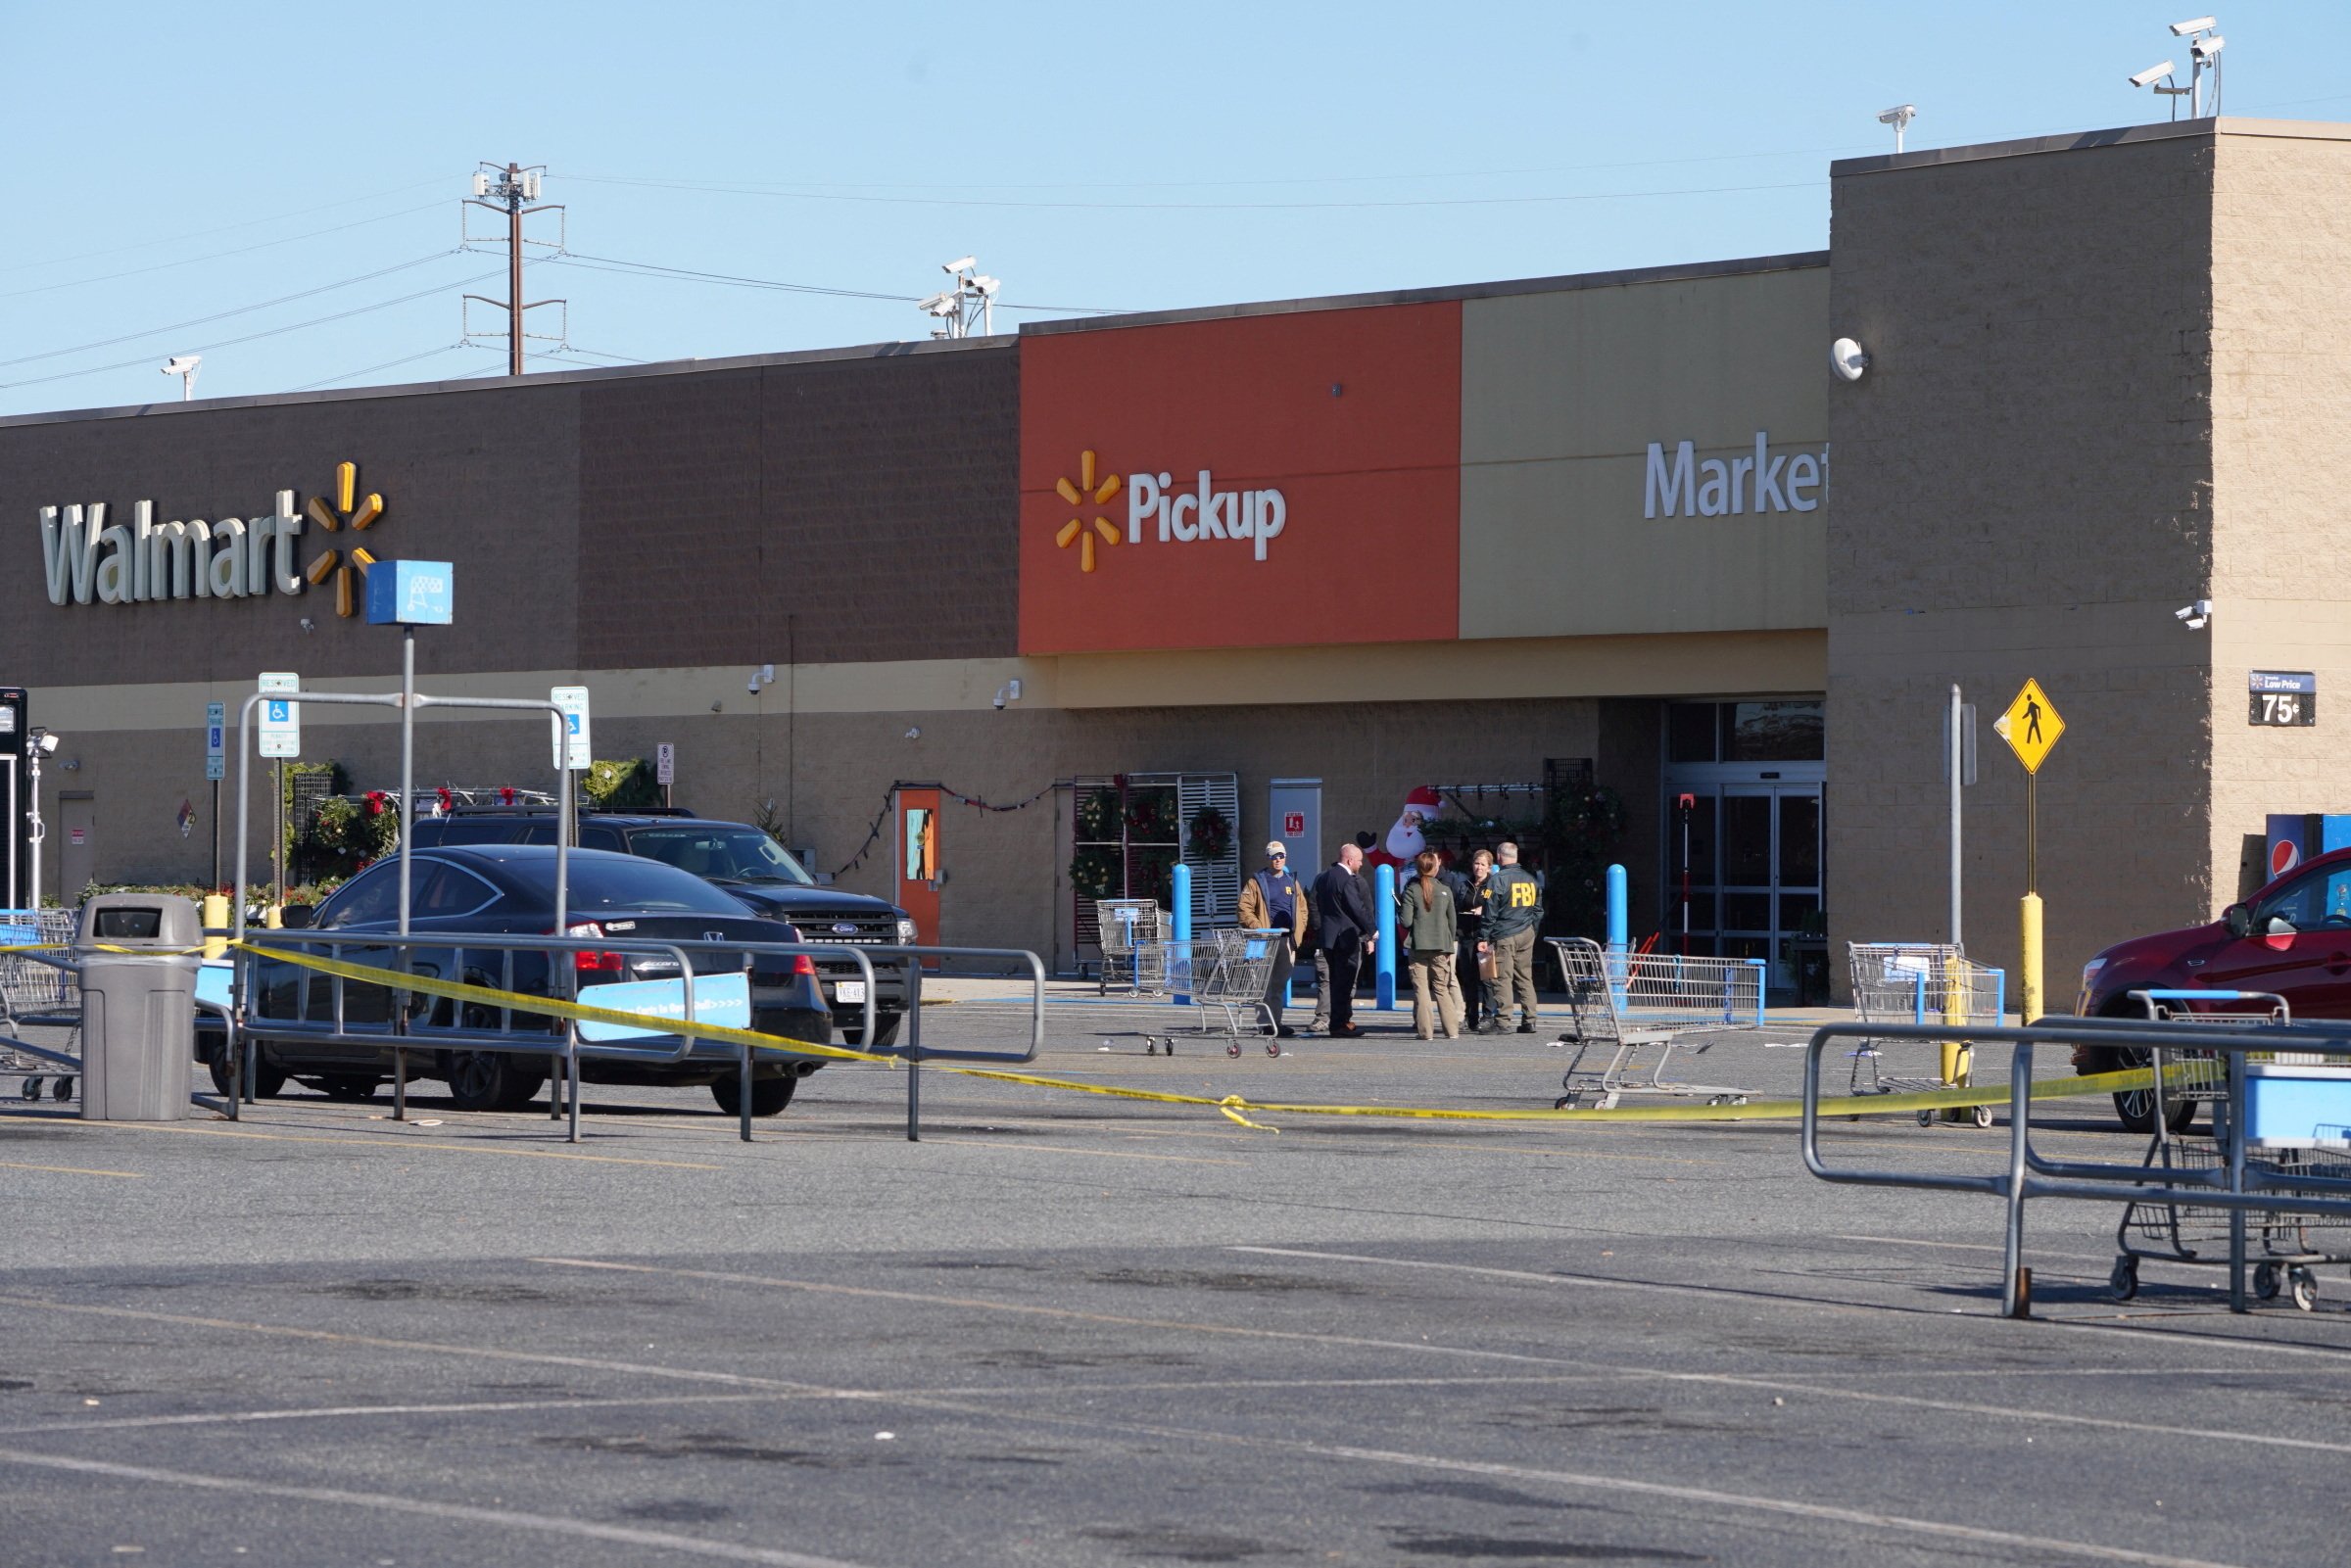 The aftermath of the mass shooting at a Walmart in Chesapeake